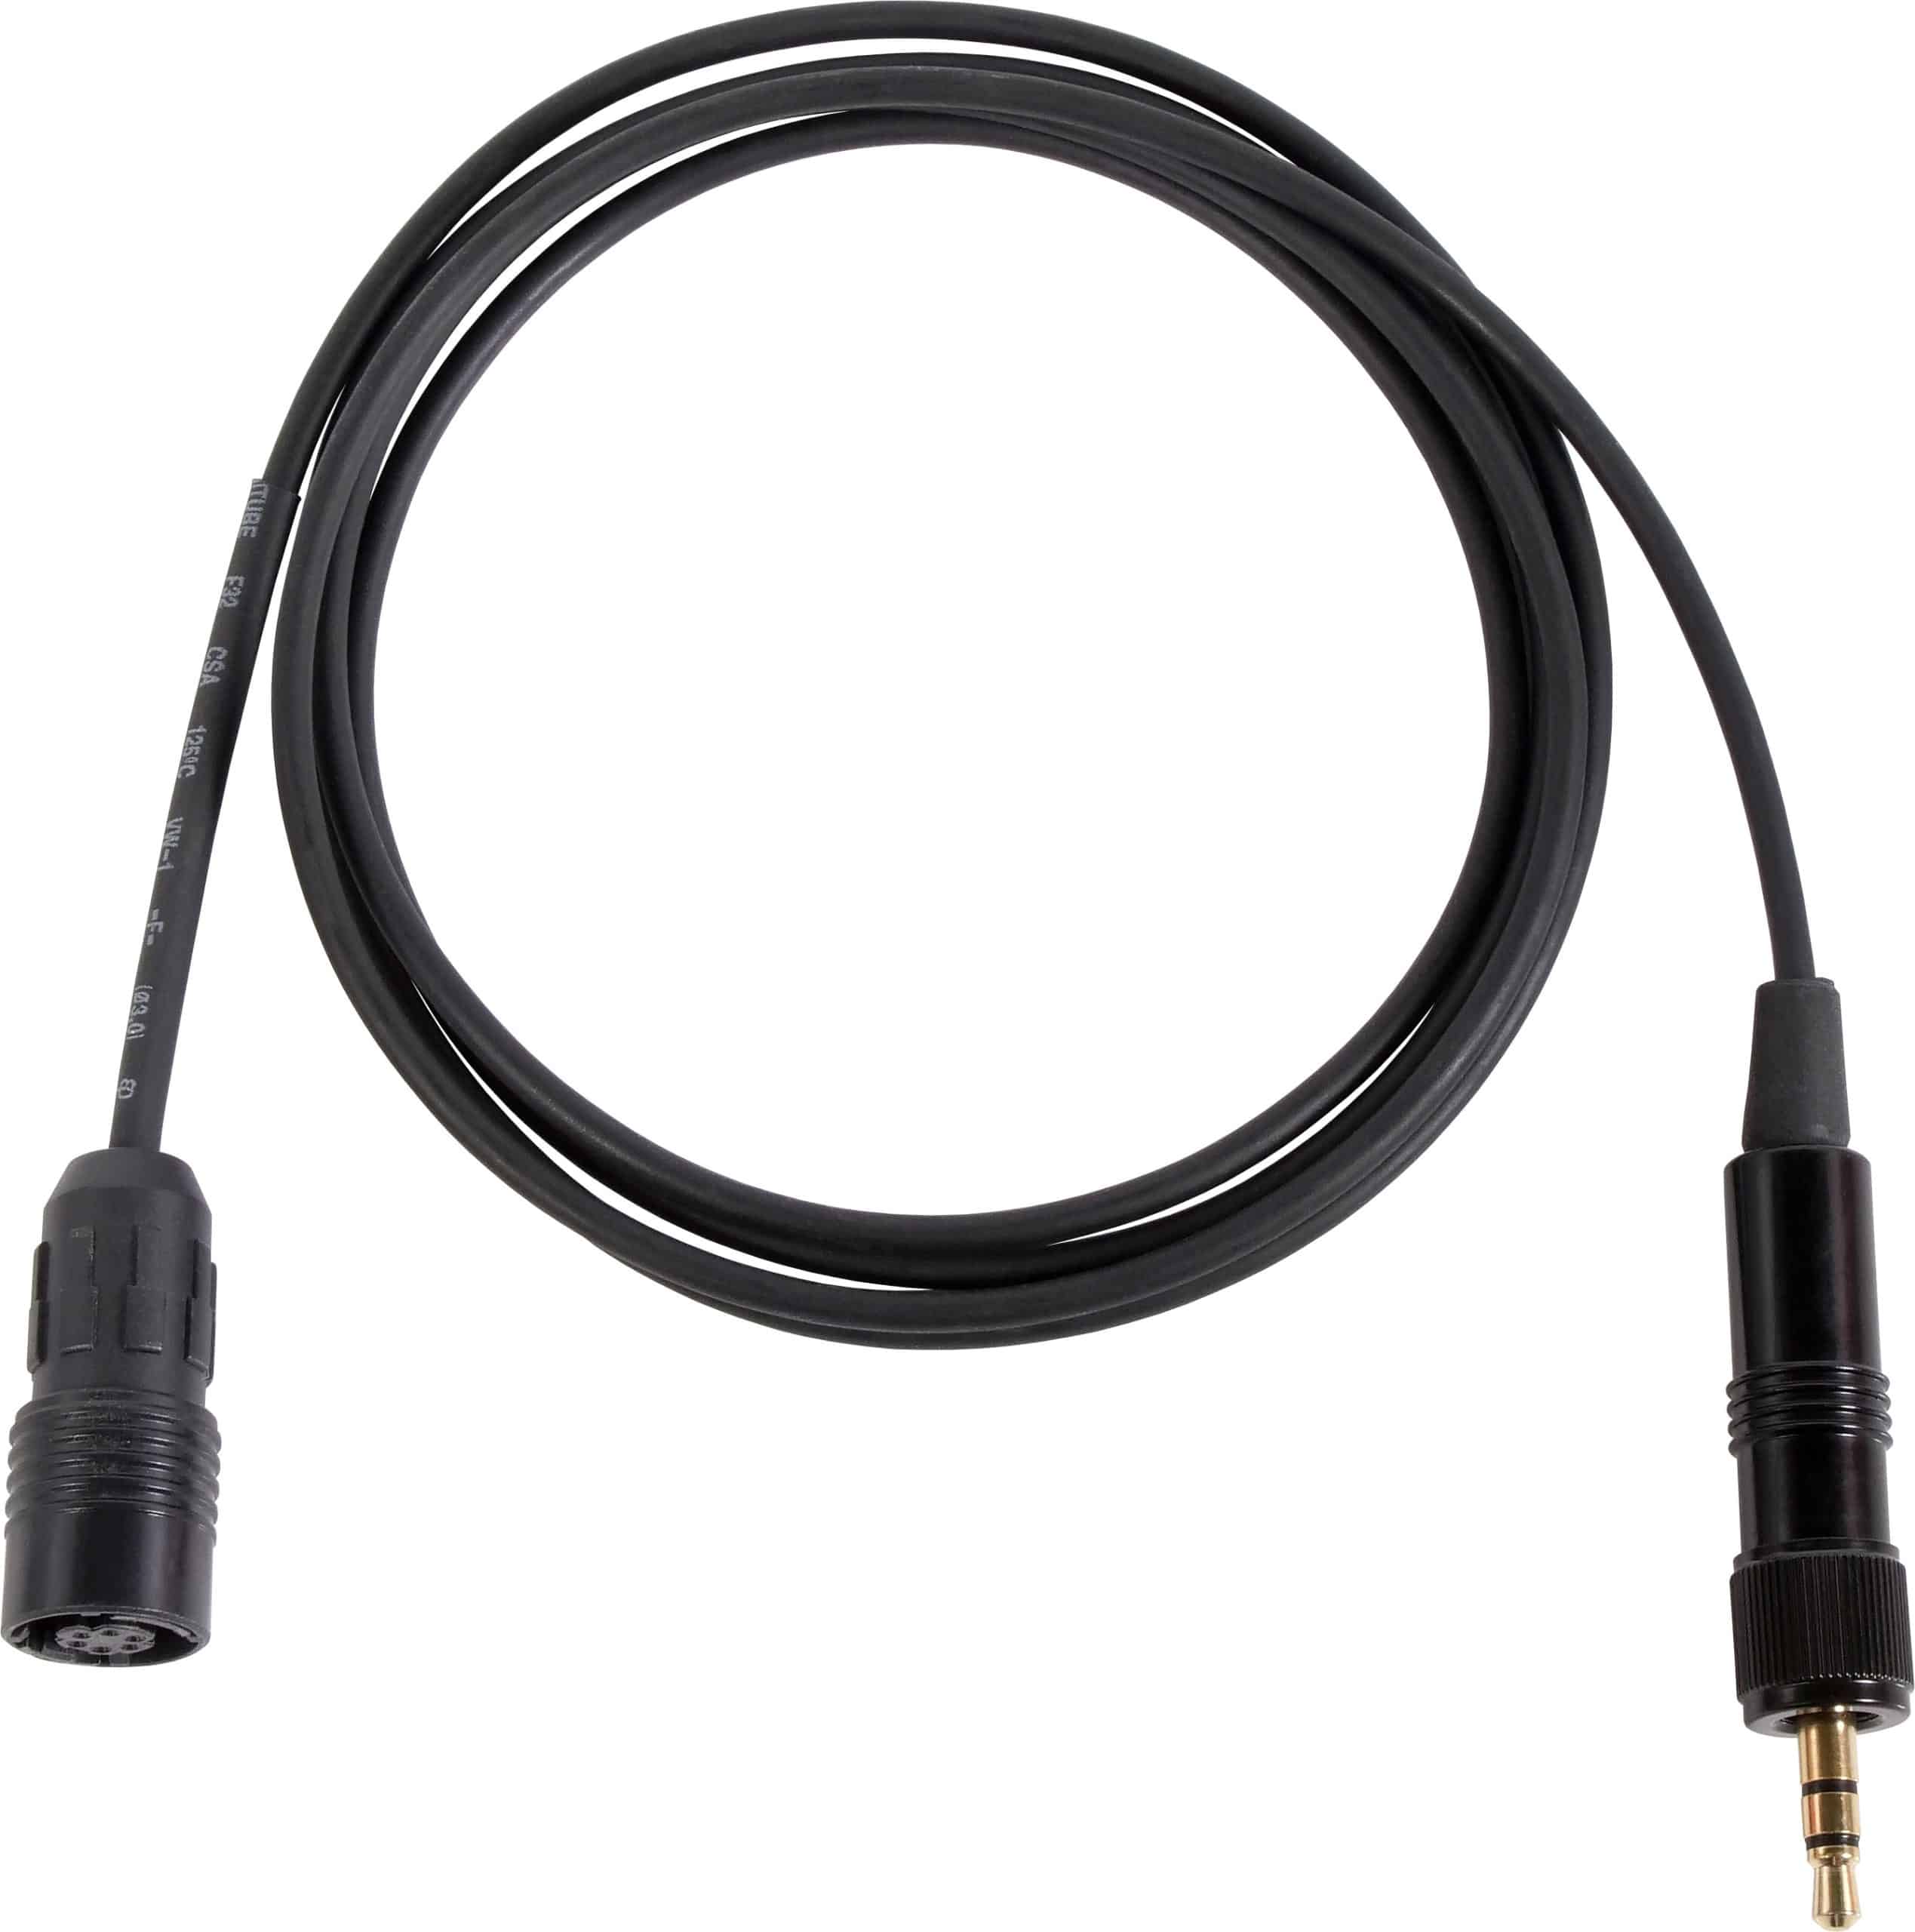 CBL2OSENBK Cable – For H2O7 Wireless Headset Mic Cable for Sennheiser® systems